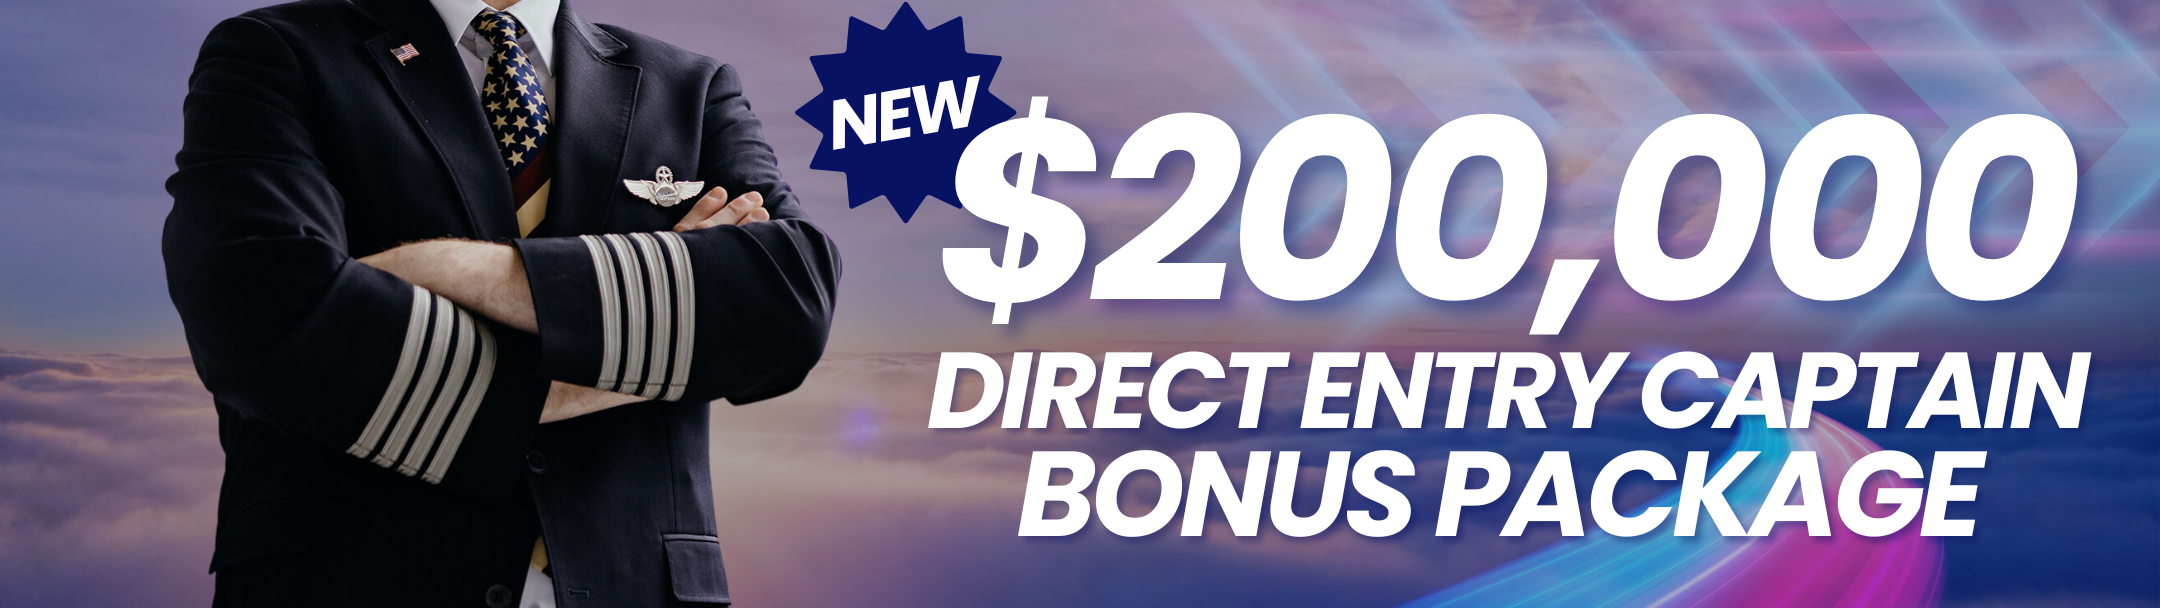 Direct Entry Captains can now earn up to $200,000 in first year bonuses!